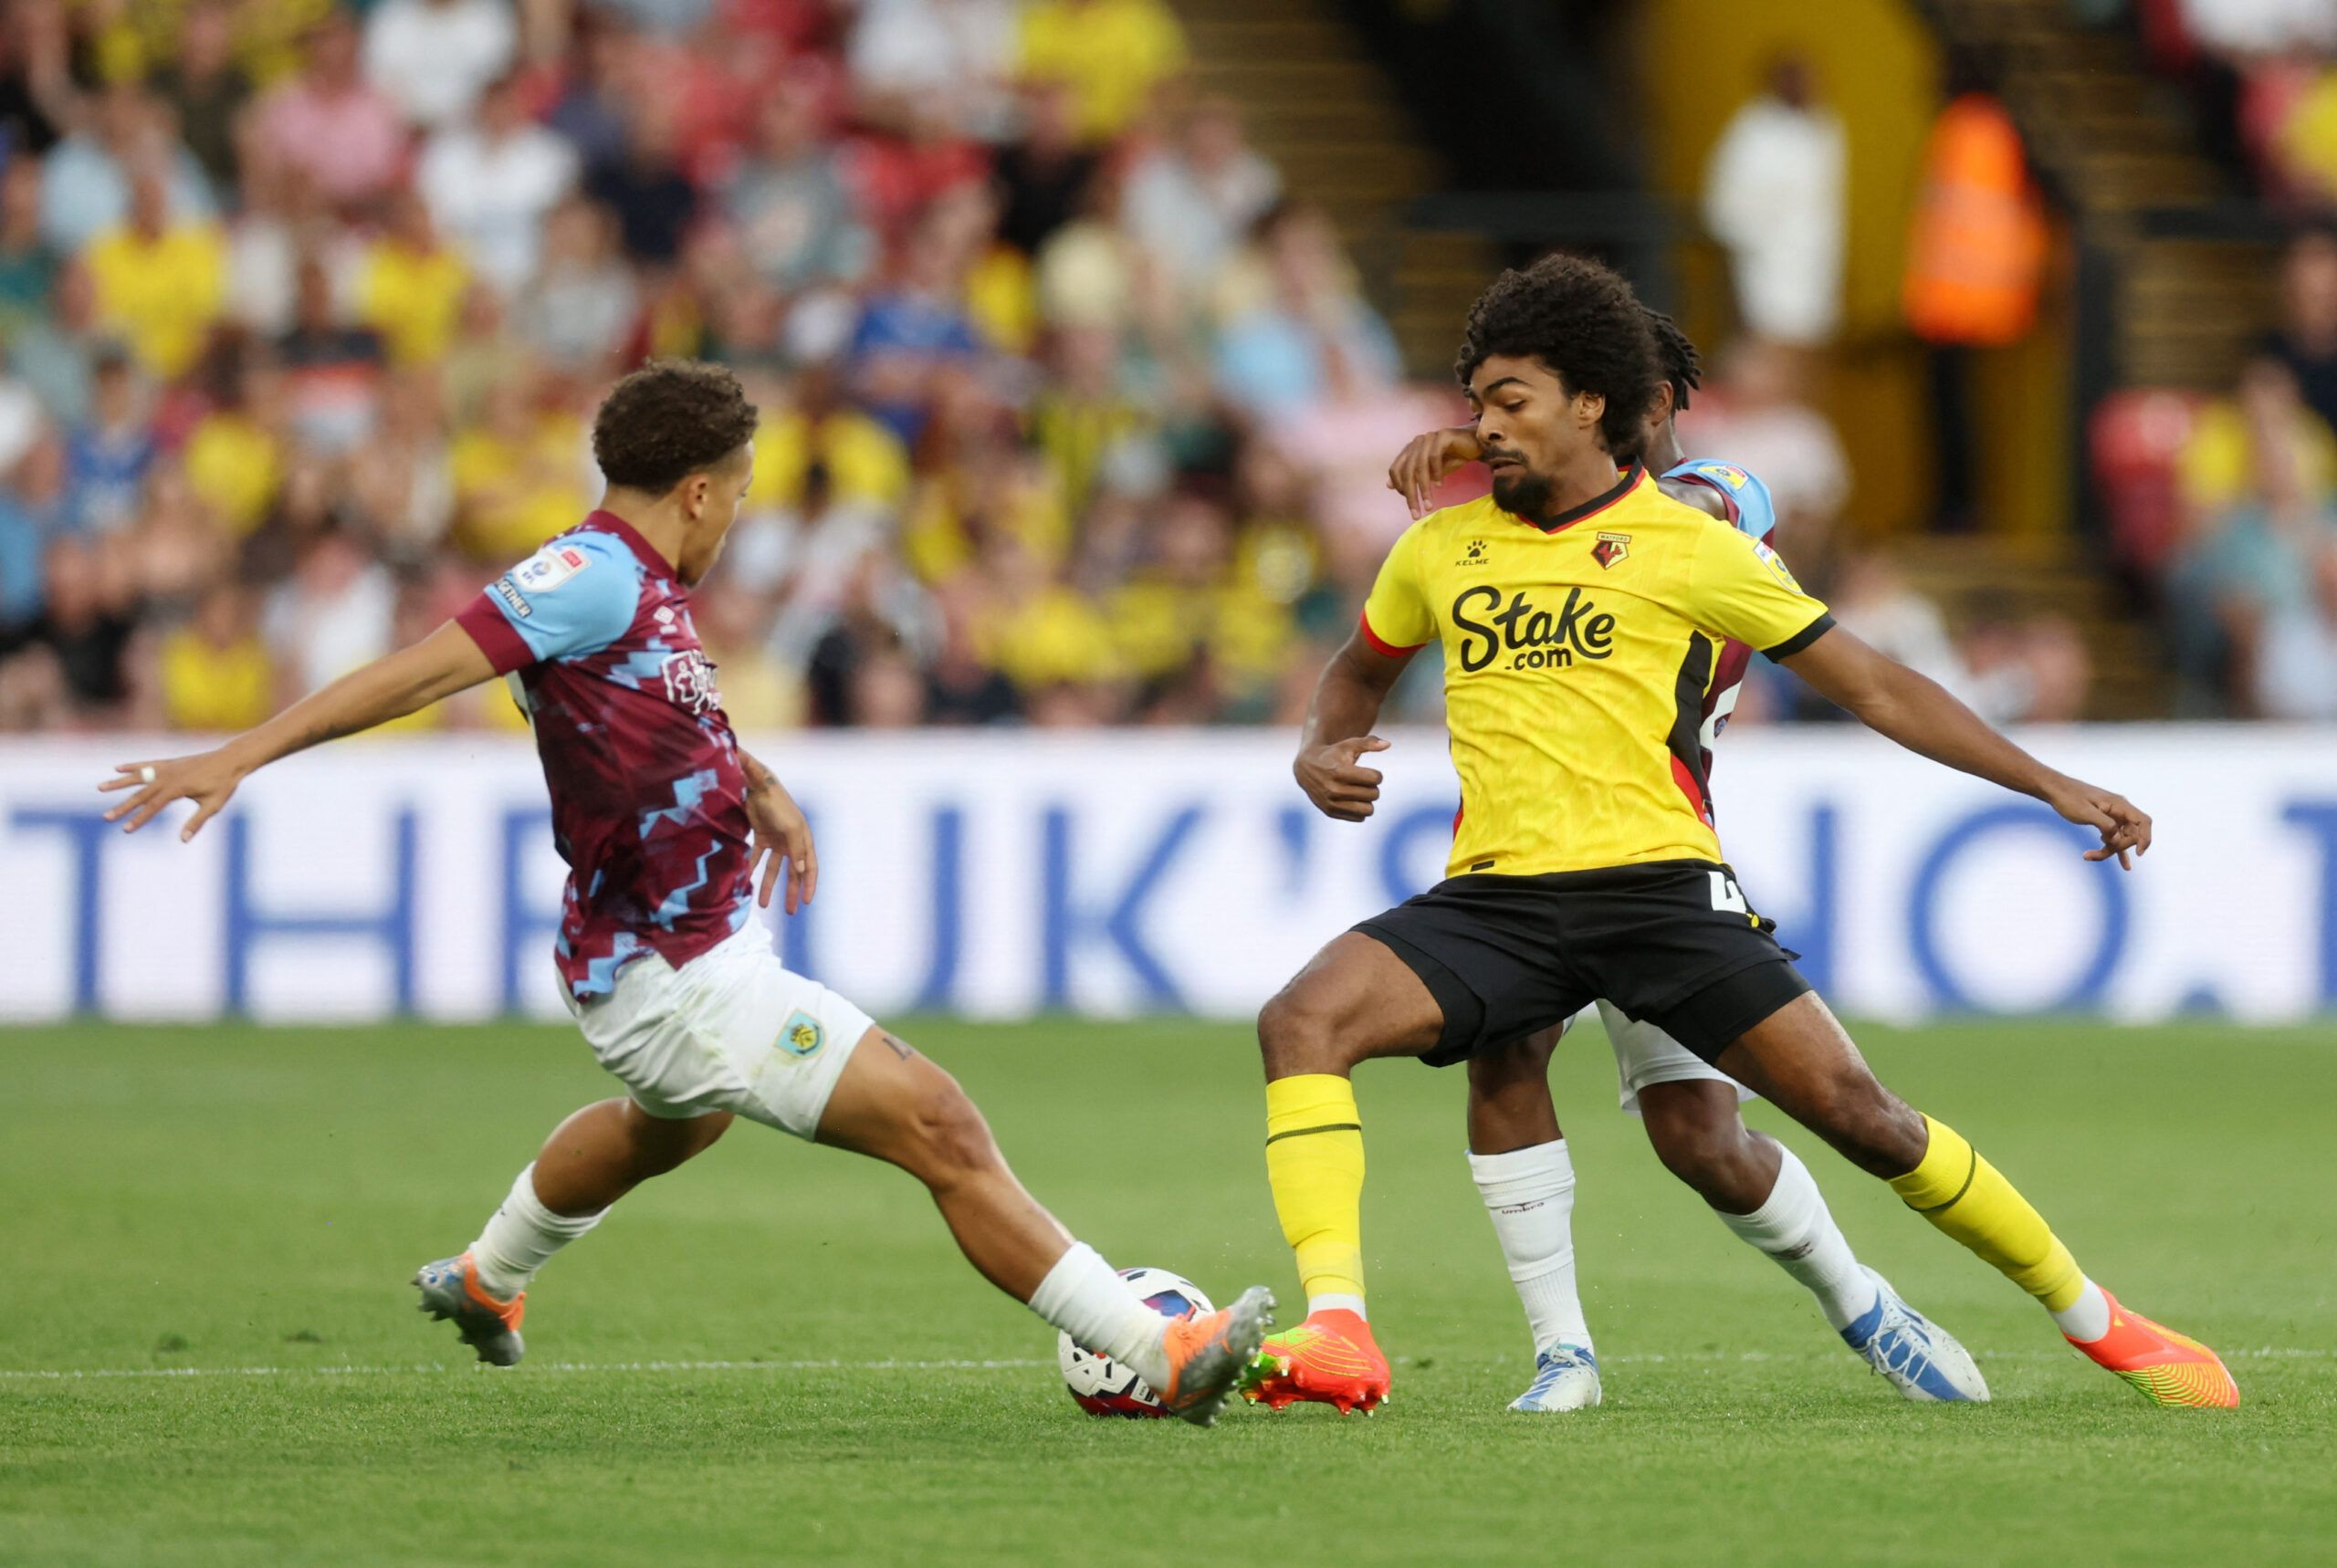 Soccer Football - Championship - Watford v Burnley - Vicarage Road, Watford, Britain - August 12, 2022 Watford's Hamza Choudhury in action with Burnley's Manuel Benson  EDITORIAL USE ONLY. No use with unauthorized audio, video, data, fixture lists, club/league logos or 